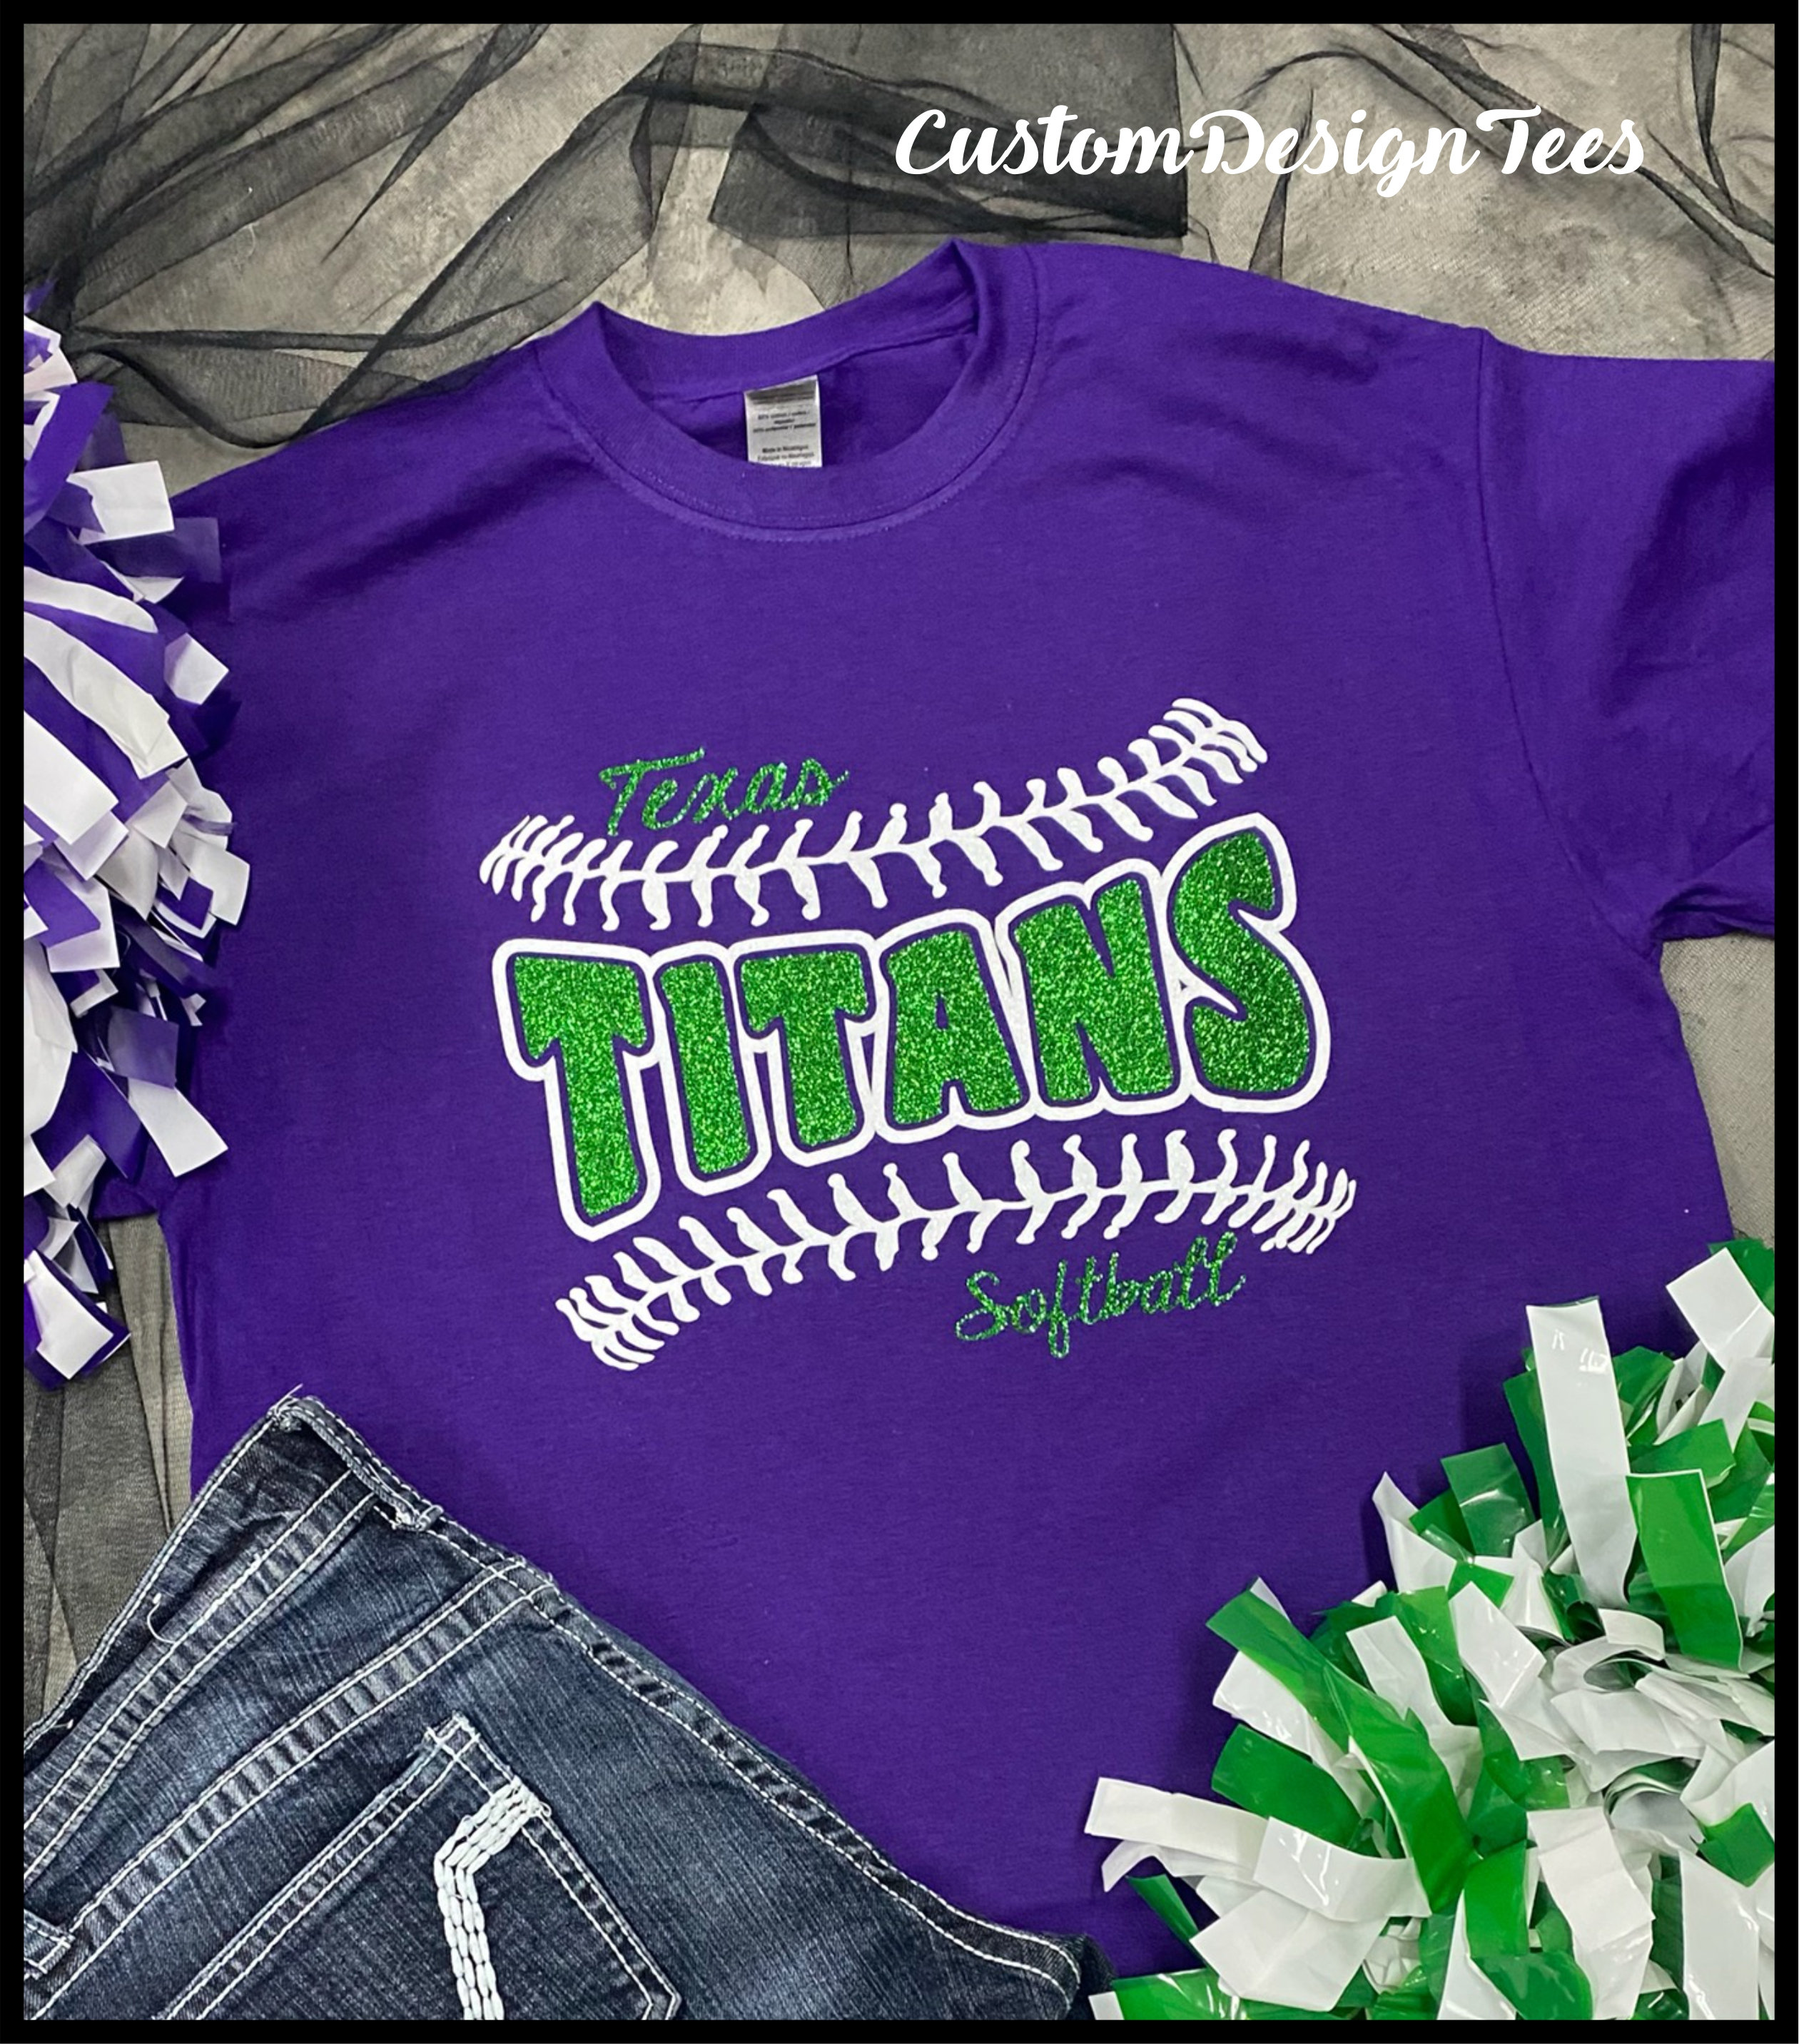 Softball T-Shirt Designs - Designs For Custom Softball T-Shirts - On Time  Delivery!